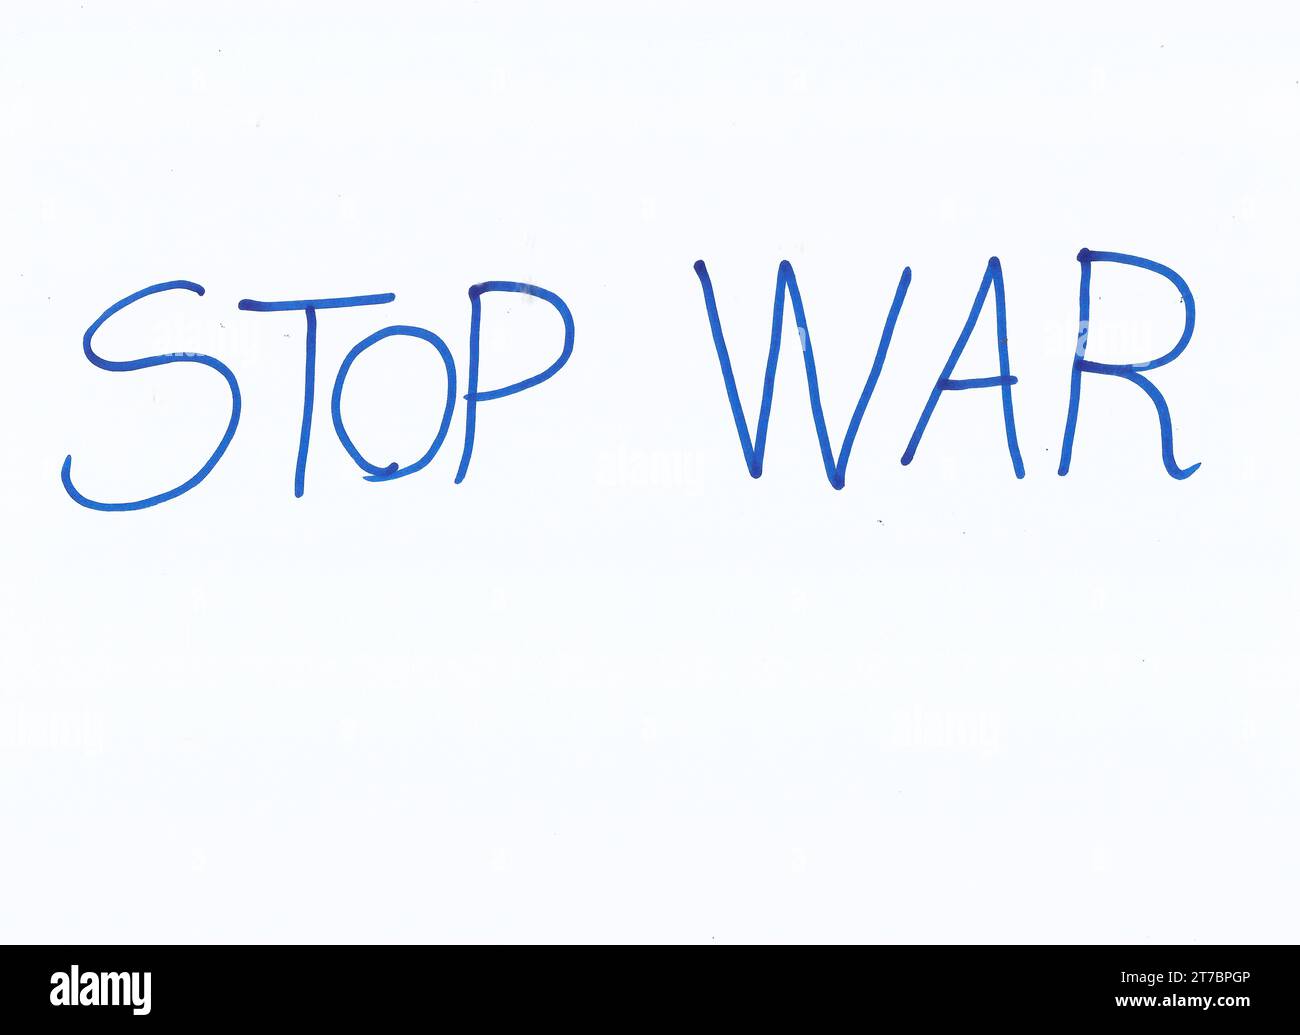 Illustrative message calling for a stop war between Israel and Palestine. World conflict. Stock Photo